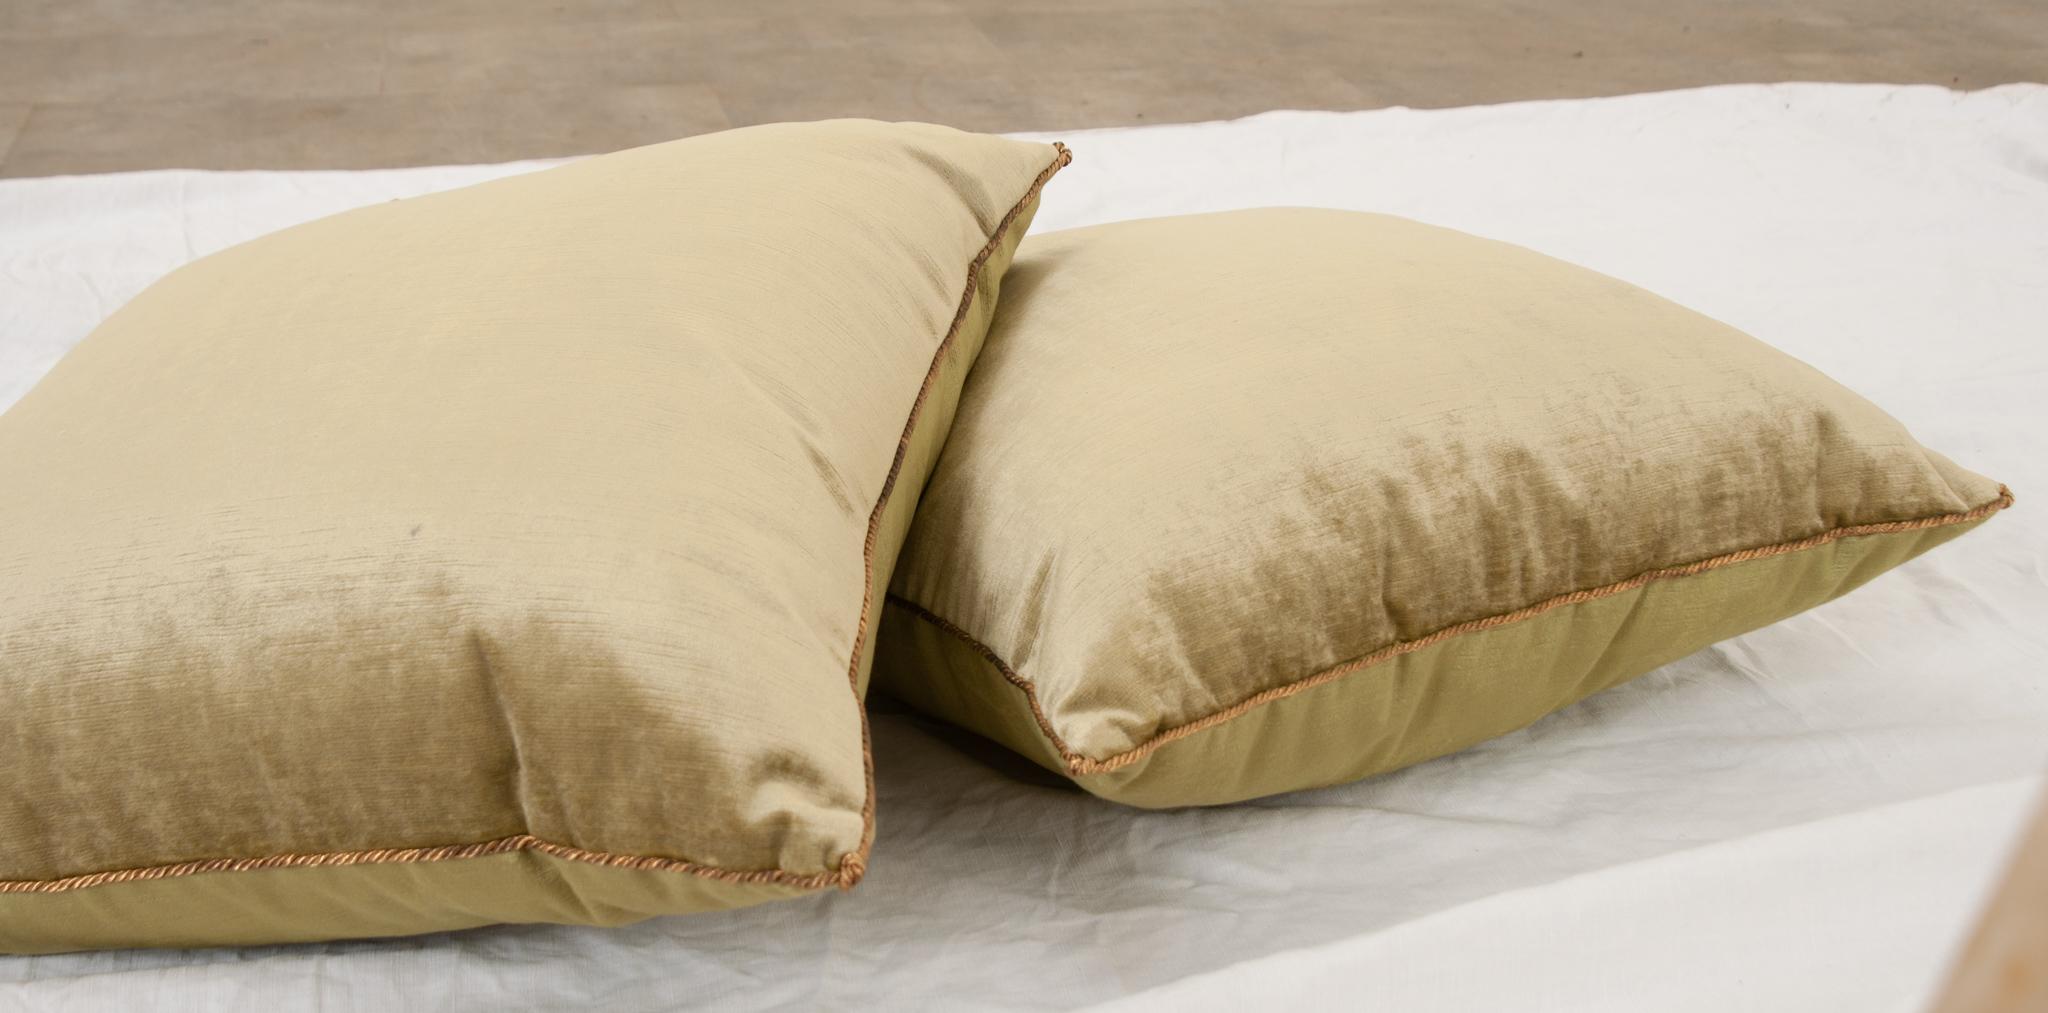 Pair of Two Tone Velvet BVIZ Pillows In Good Condition For Sale In Baton Rouge, LA